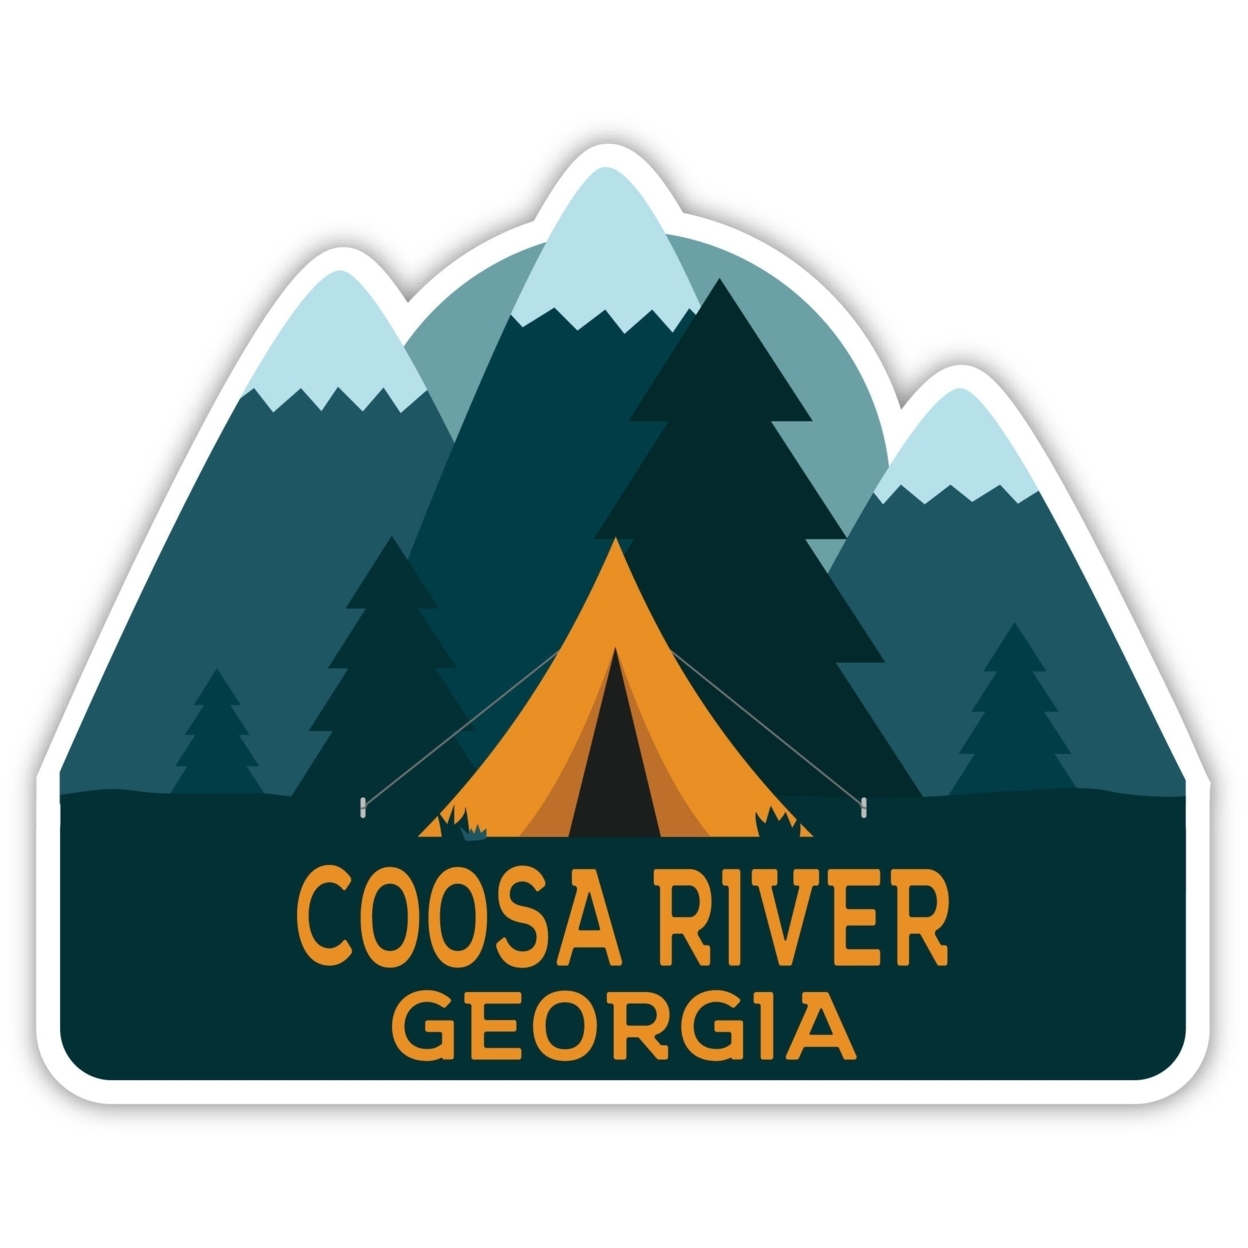 Coosa River Georgia Souvenir Decorative Stickers (Choose Theme And Size) - 4-Pack, 4-Inch, Tent